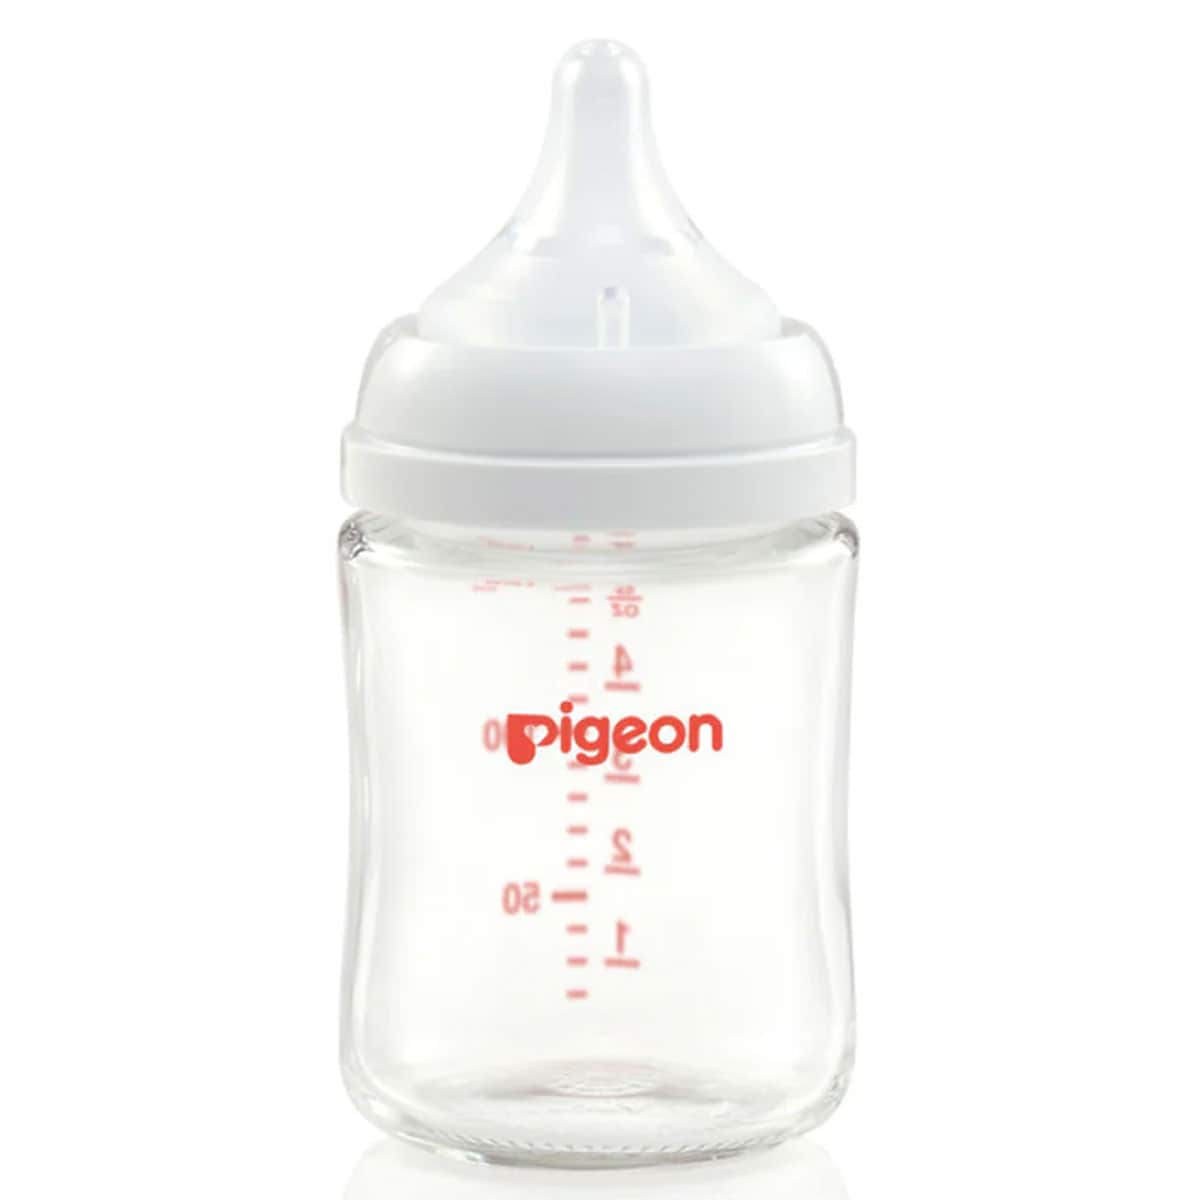 Pigeon Softouch Iii Glass Baby Bottle 160Ml